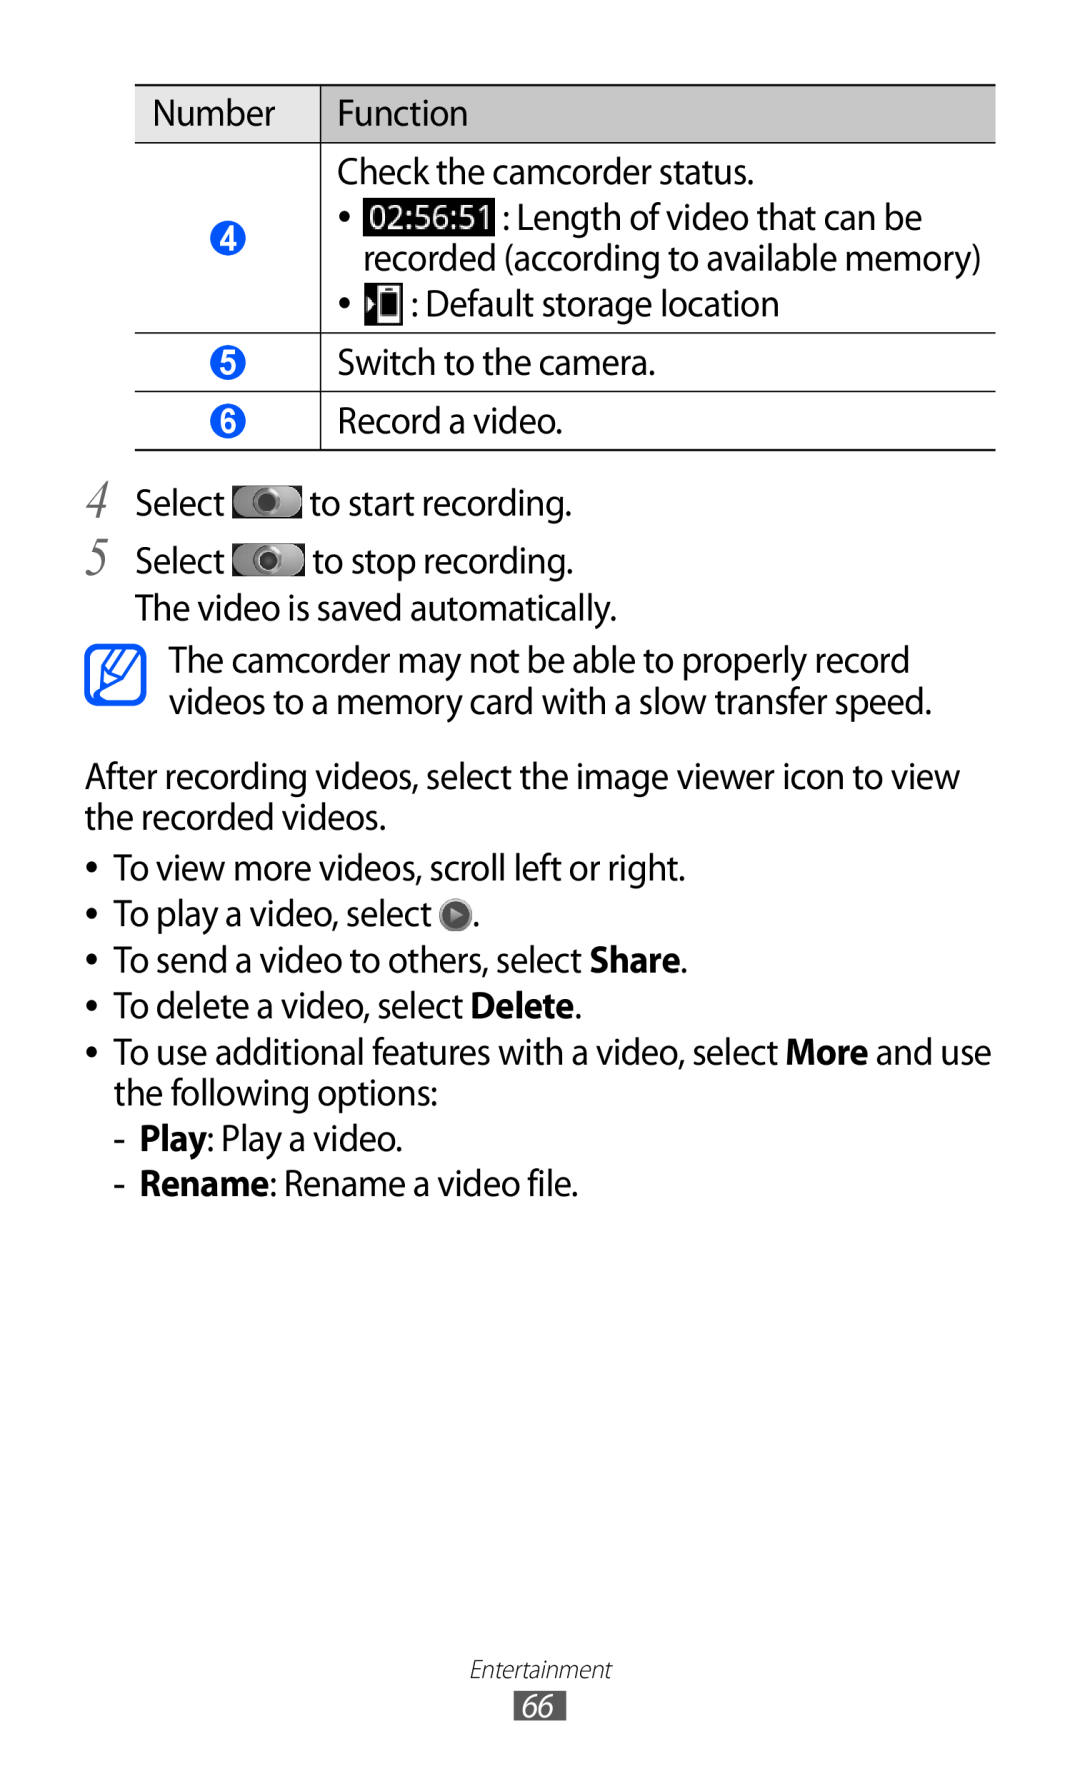 Samsung GT-I9070HKATHR recorded according to available memory, Select to stop recording. The video is saved automatically 